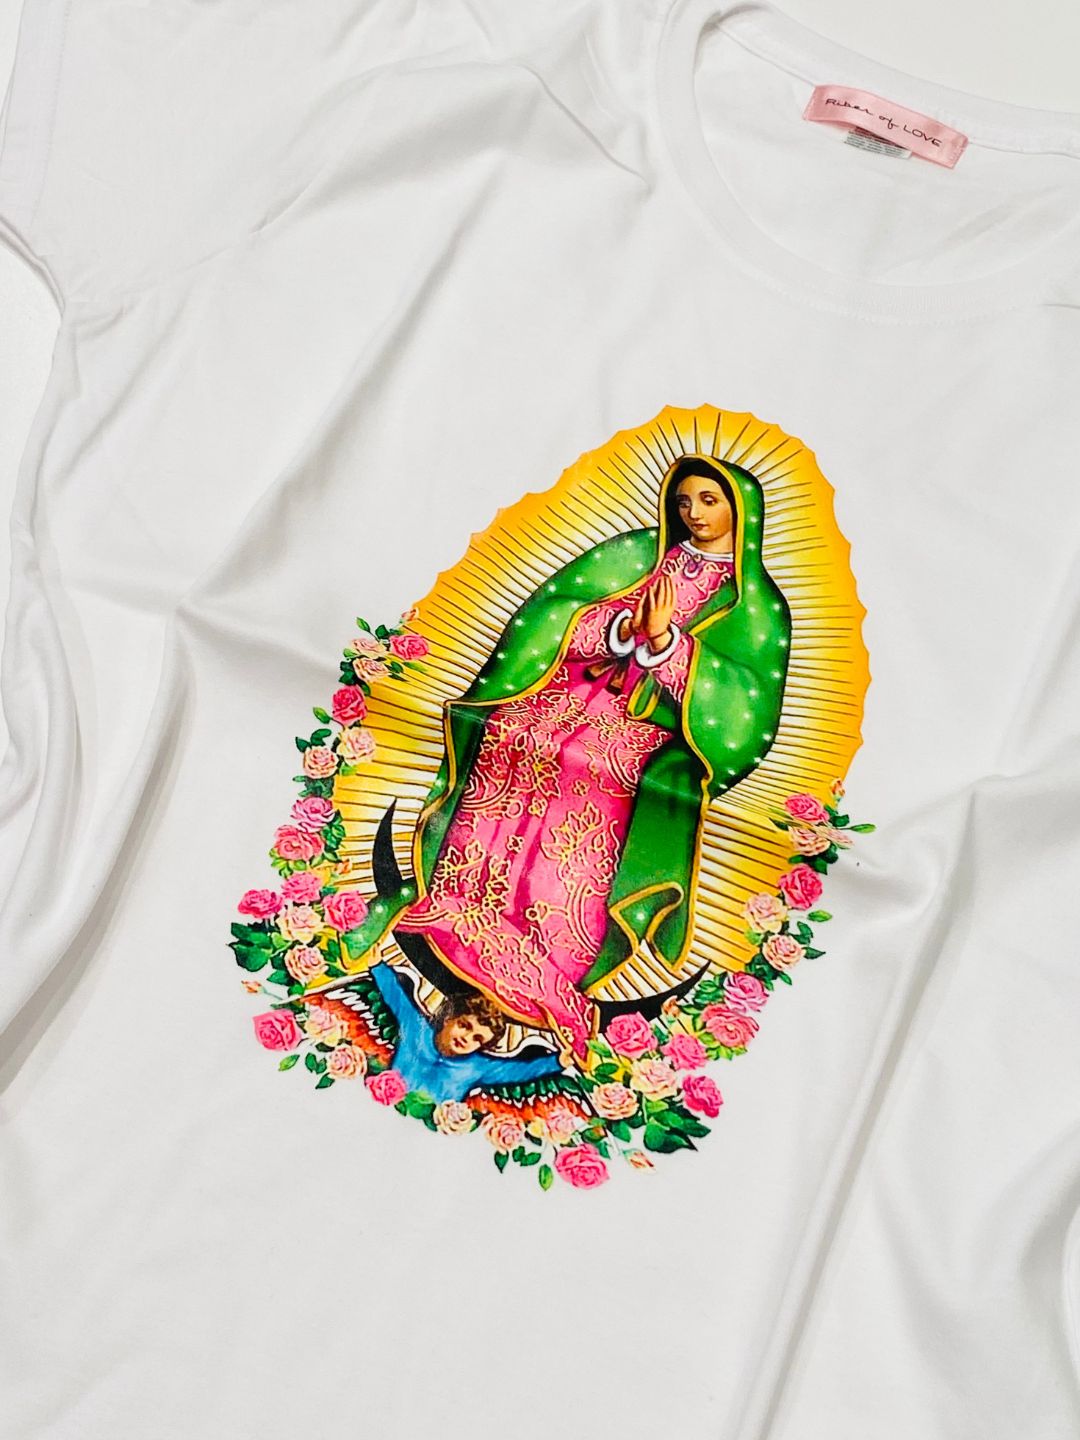 T-SHIRT MADONNA DI GUADALUPE Mod.2 Ribes of LOVE